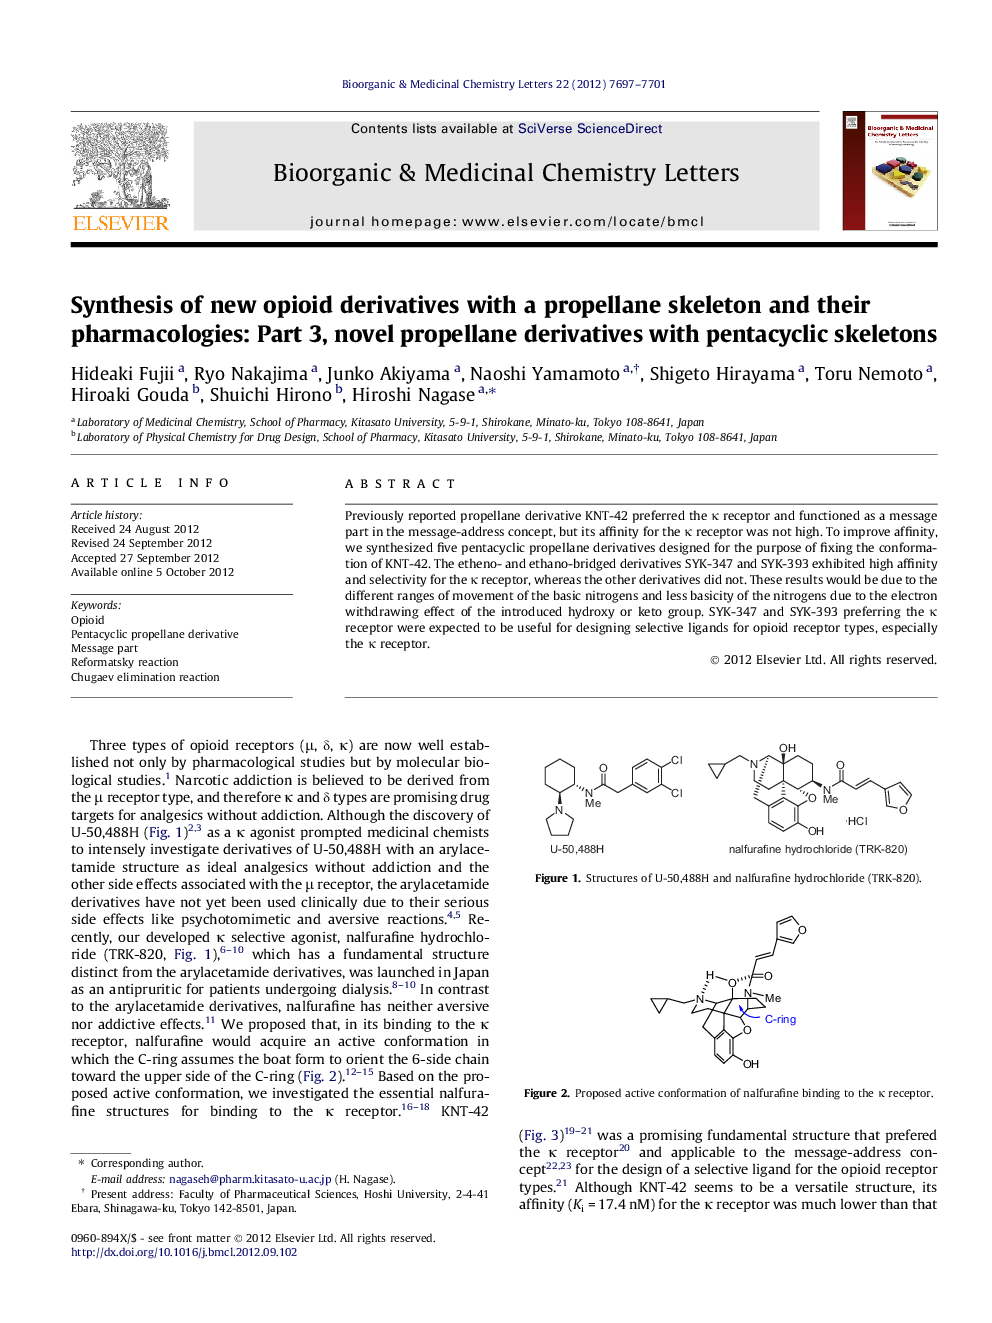 Synthesis of new opioid derivatives with a propellane skeleton and their pharmacologies: Part 3, novel propellane derivatives with pentacyclic skeletons